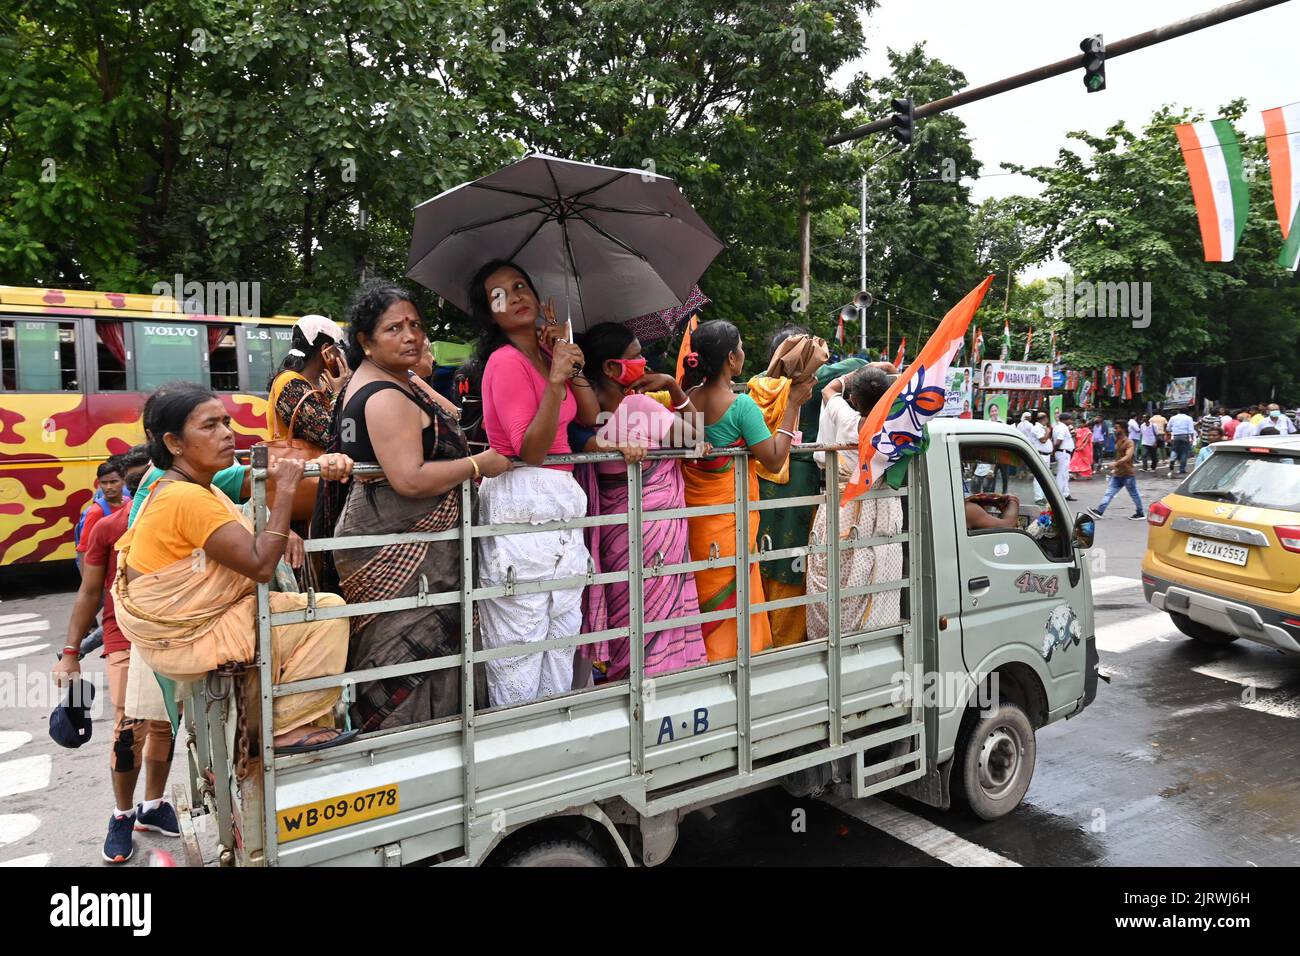 TMC MP 'amused' as personal photos shared online: 'Bengal's women live a  life